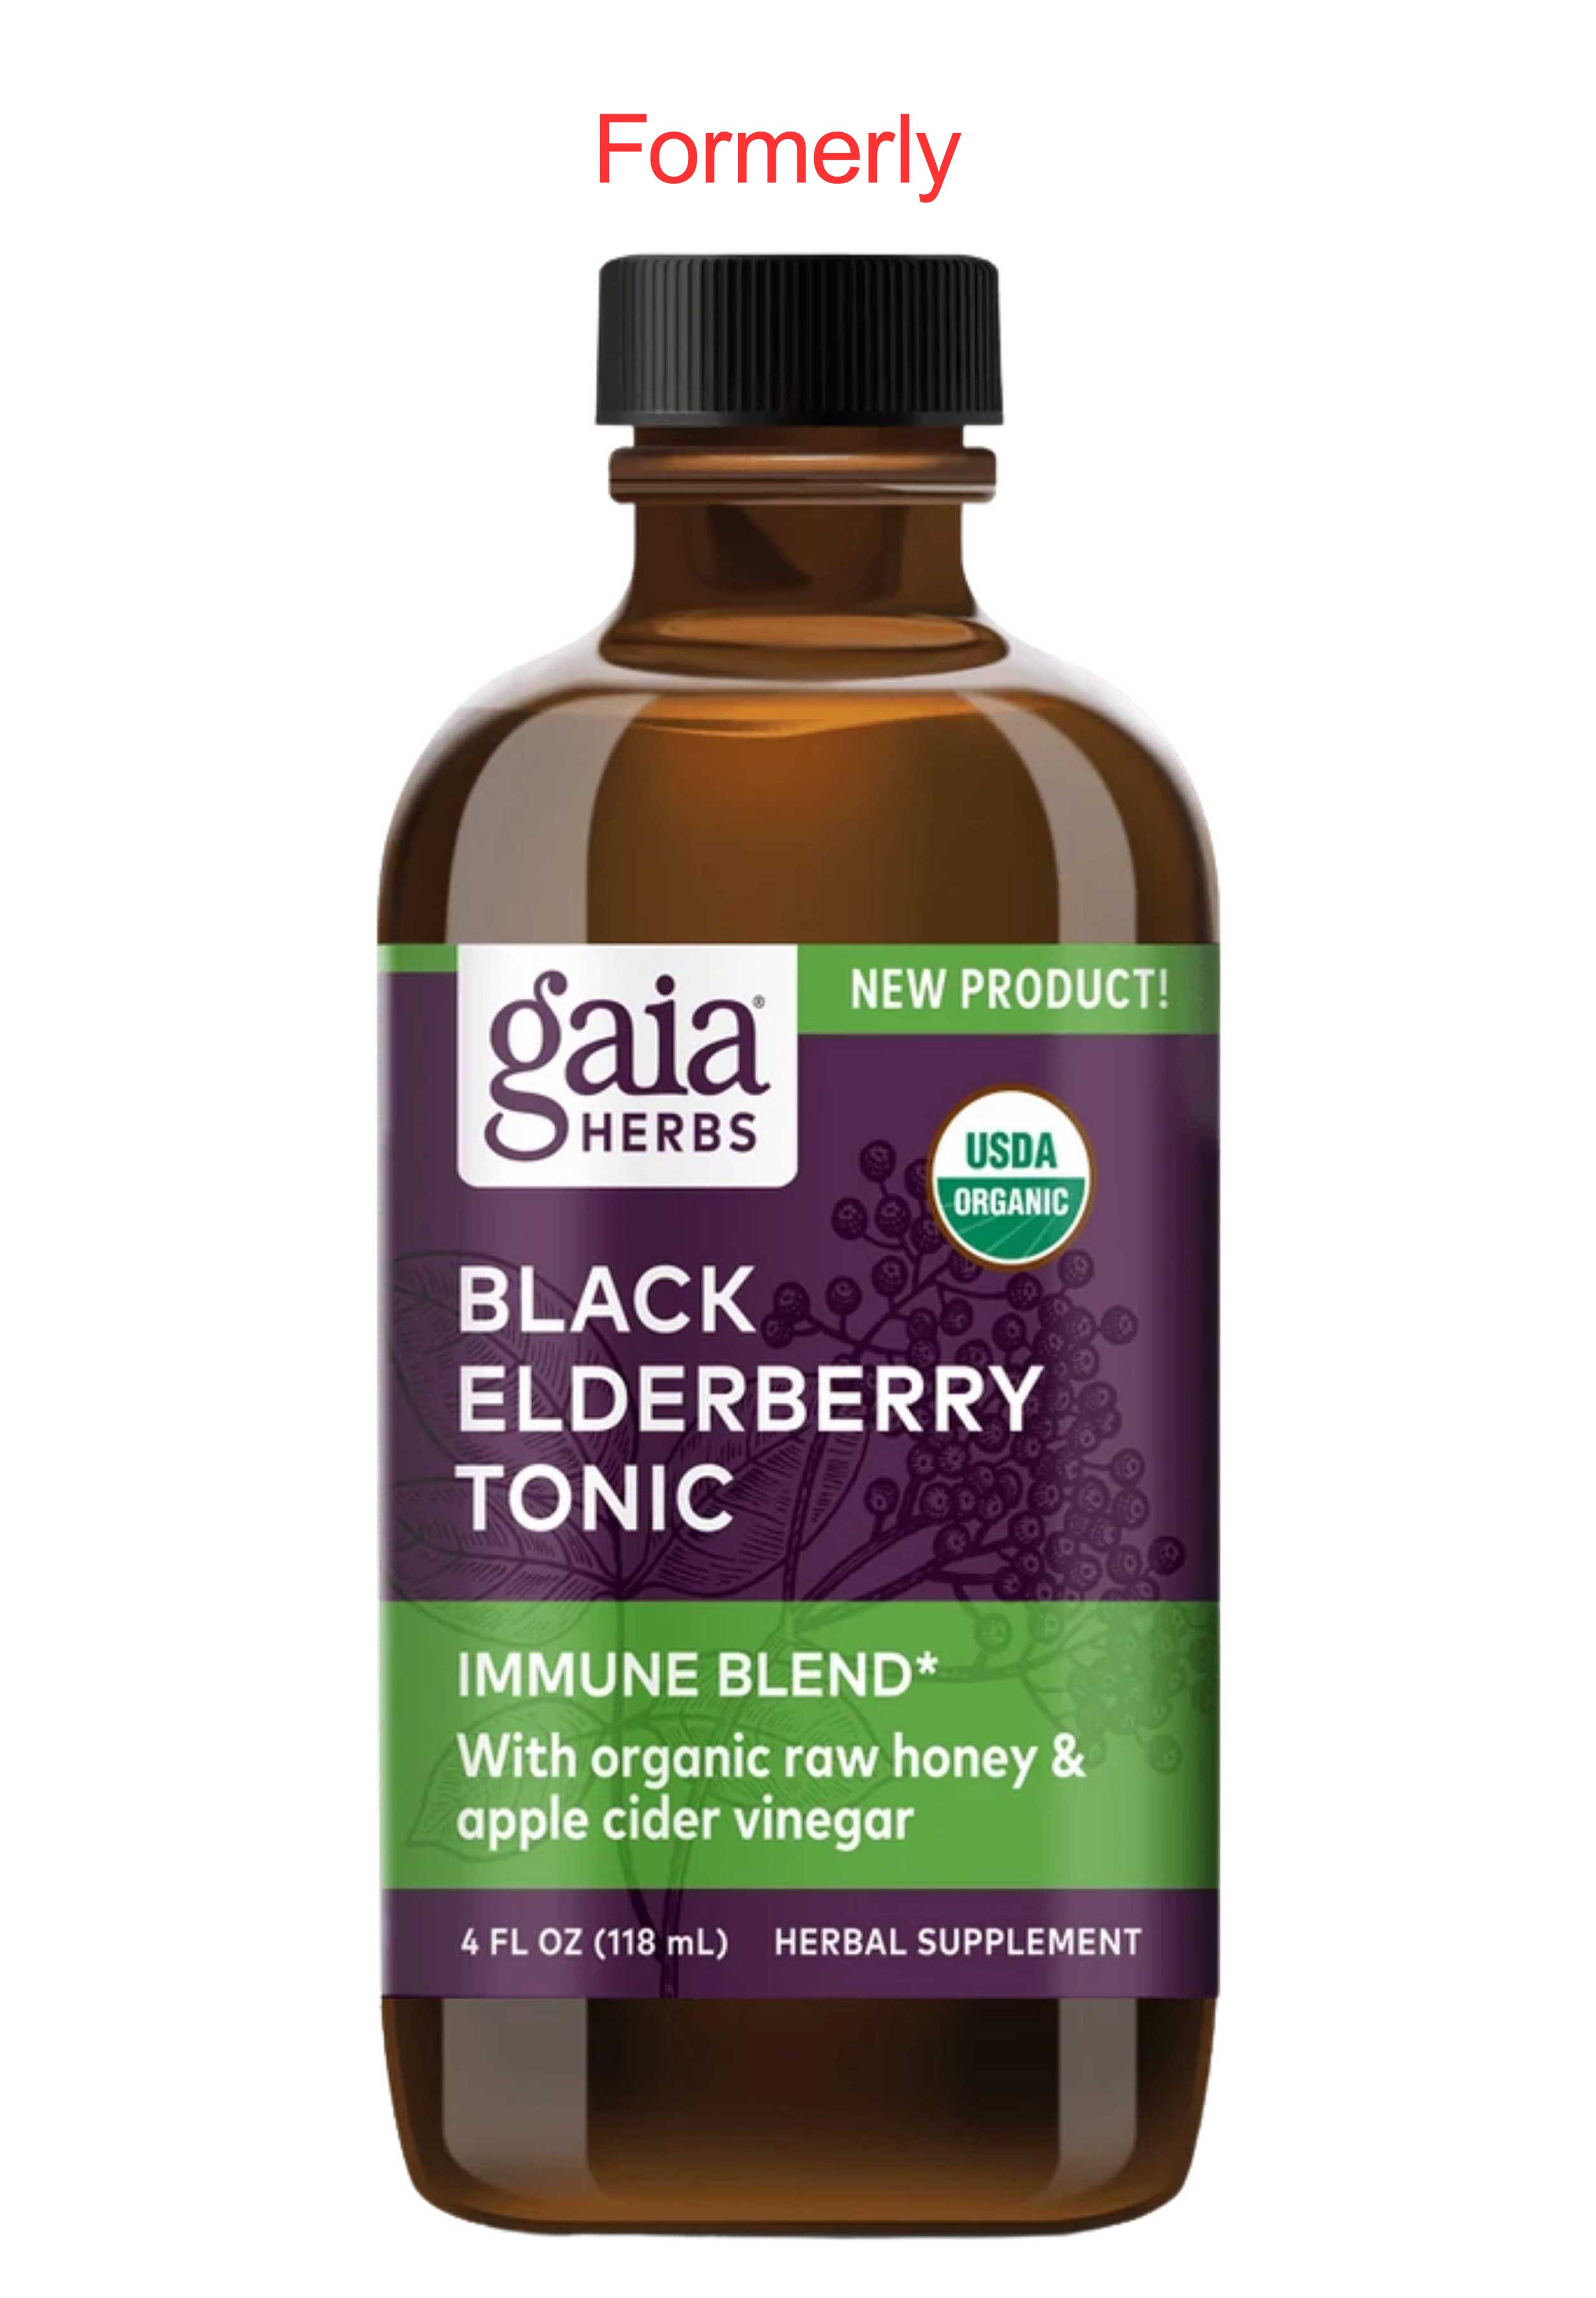 Gaia Herbs Black 3-IN-1 Daily Immune Syrup (Formerly Elderberry Tonic) Formerly